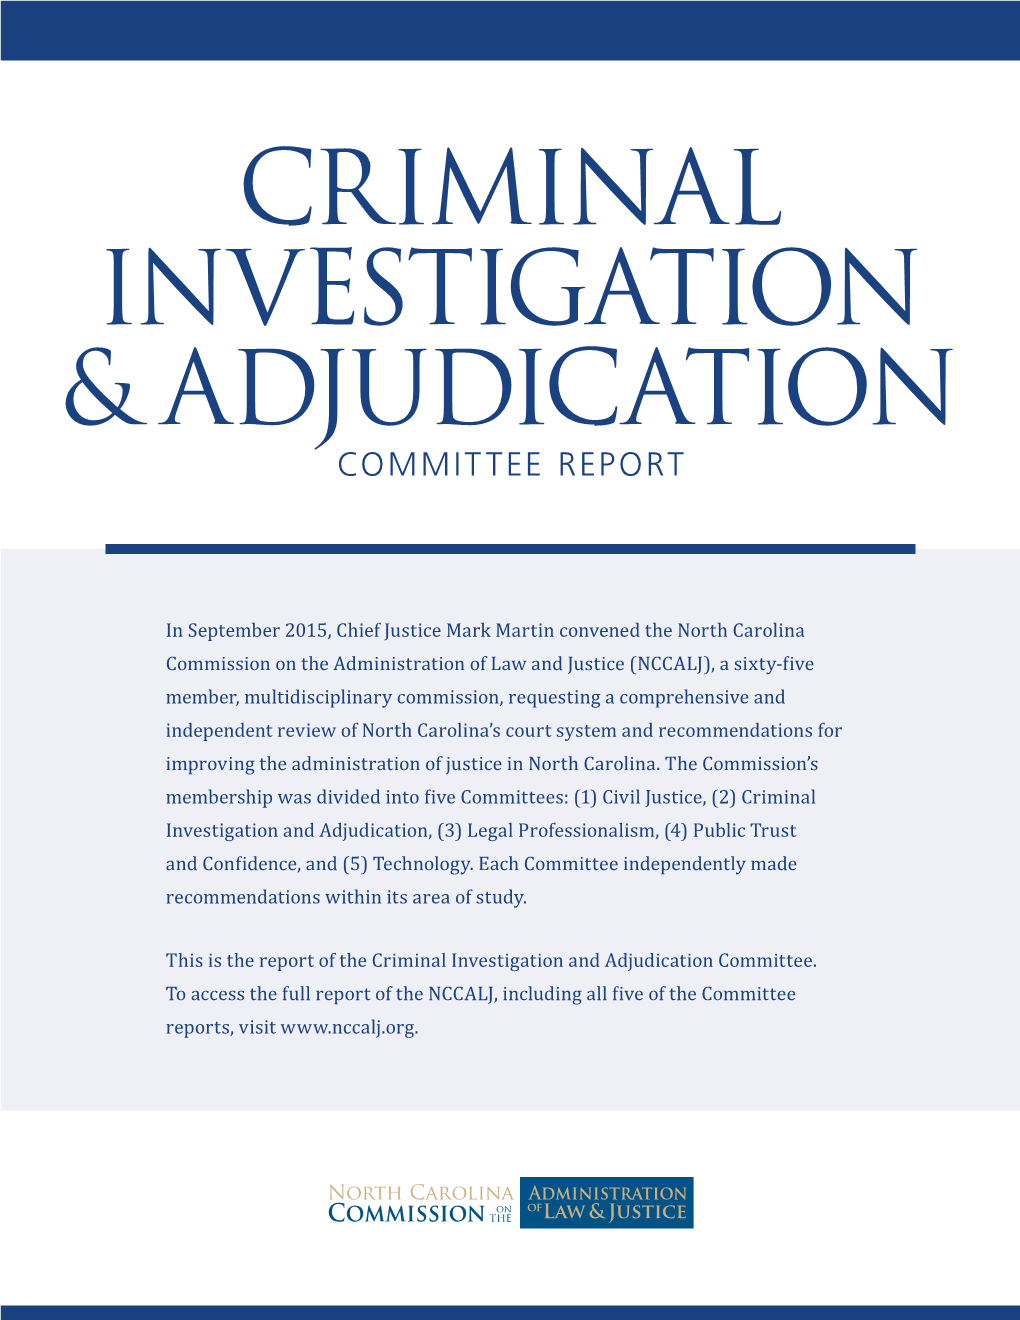 Criminal Investigation and Adjudication Committee Report